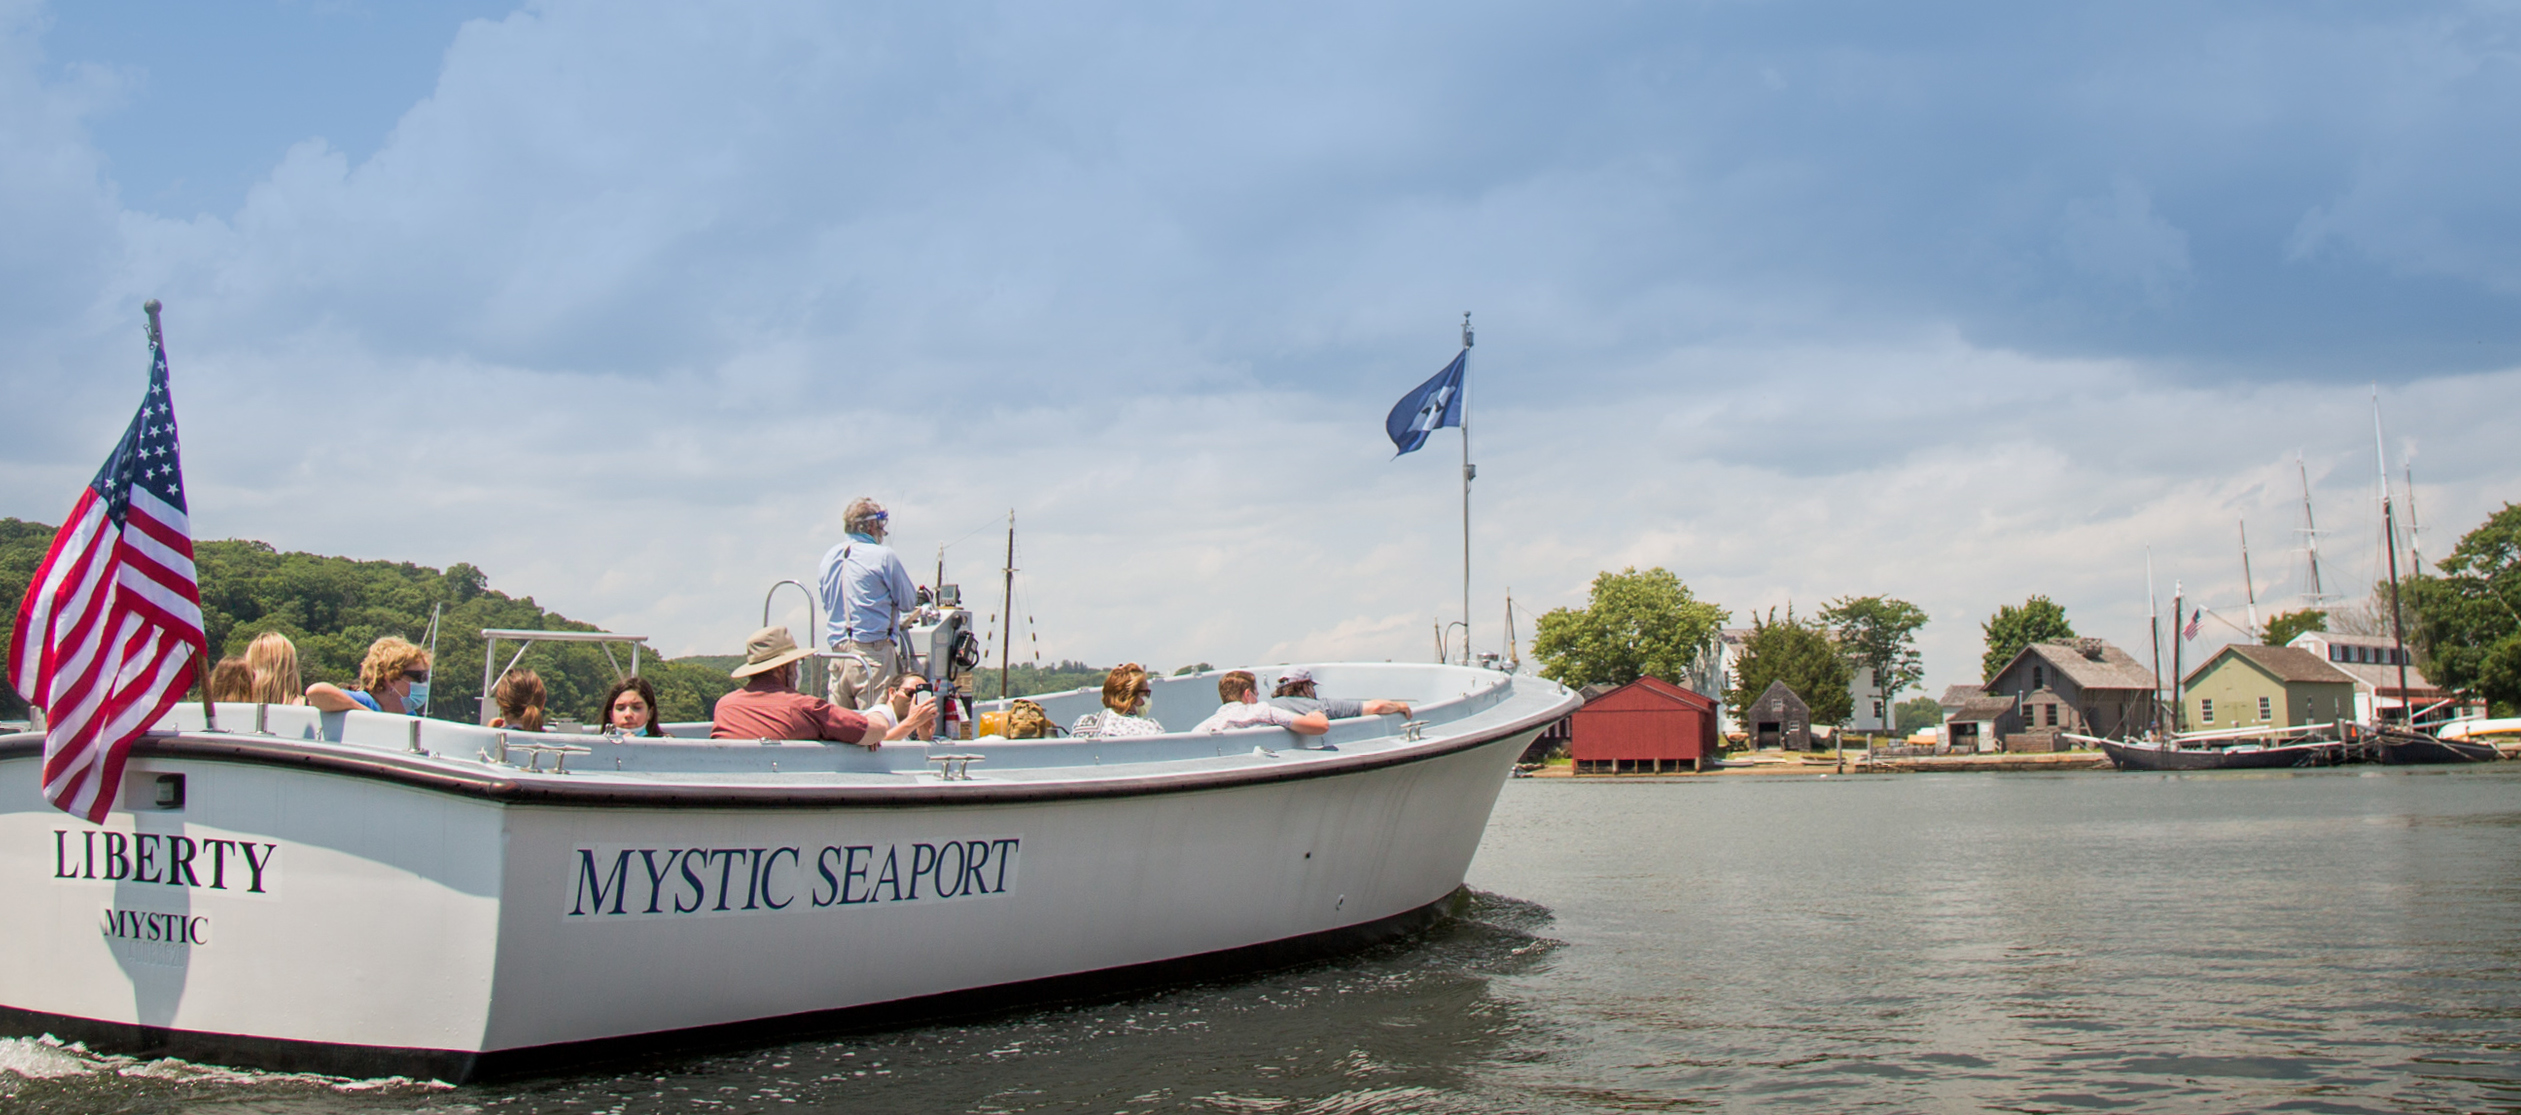 Experience an Summer at Mystic Seaport Museum! Mystic